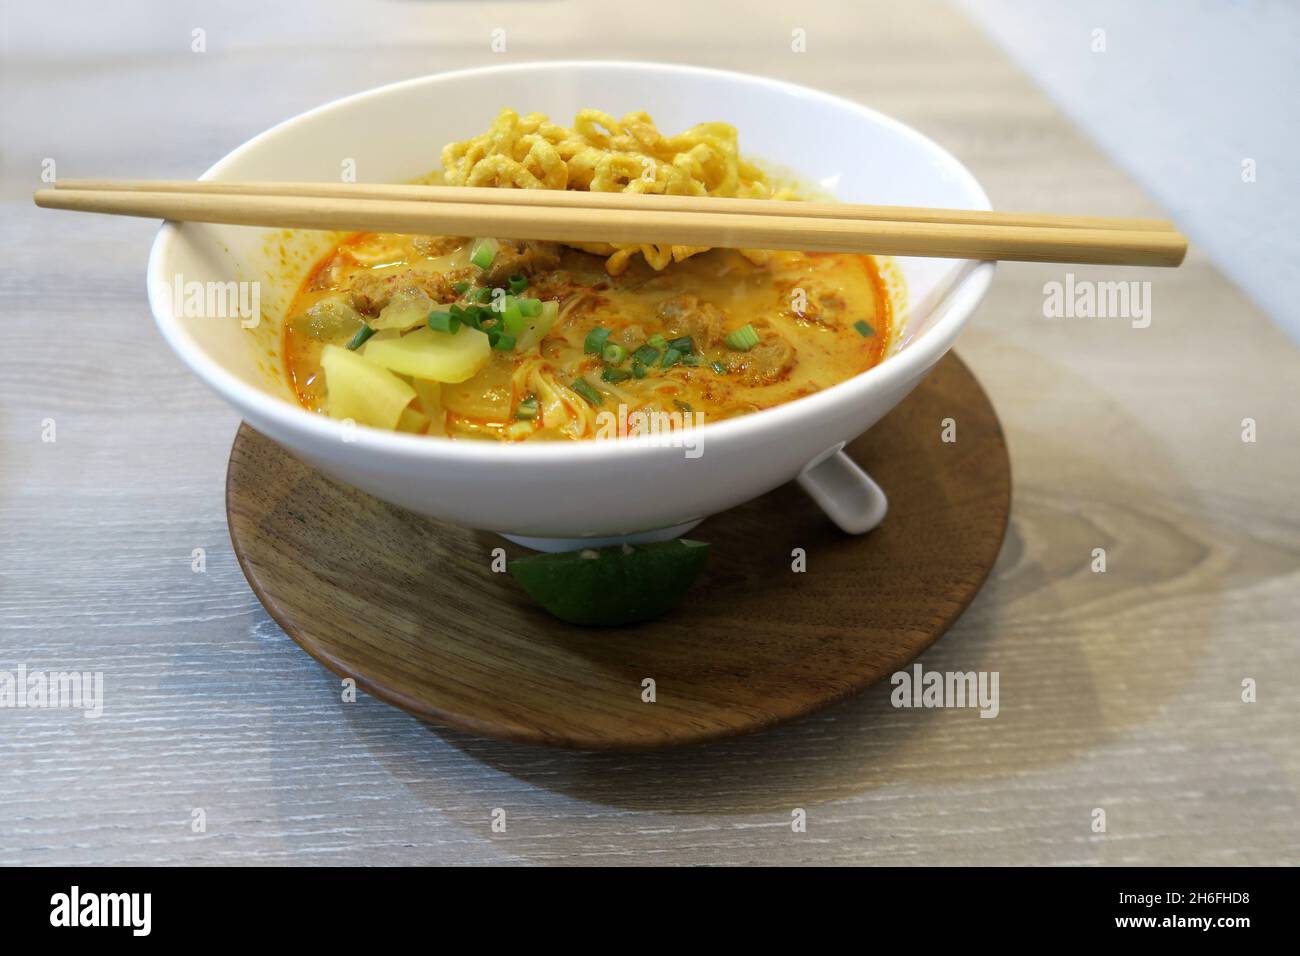 Chiang Mai curried noodles (Khao soi) Stock Photo